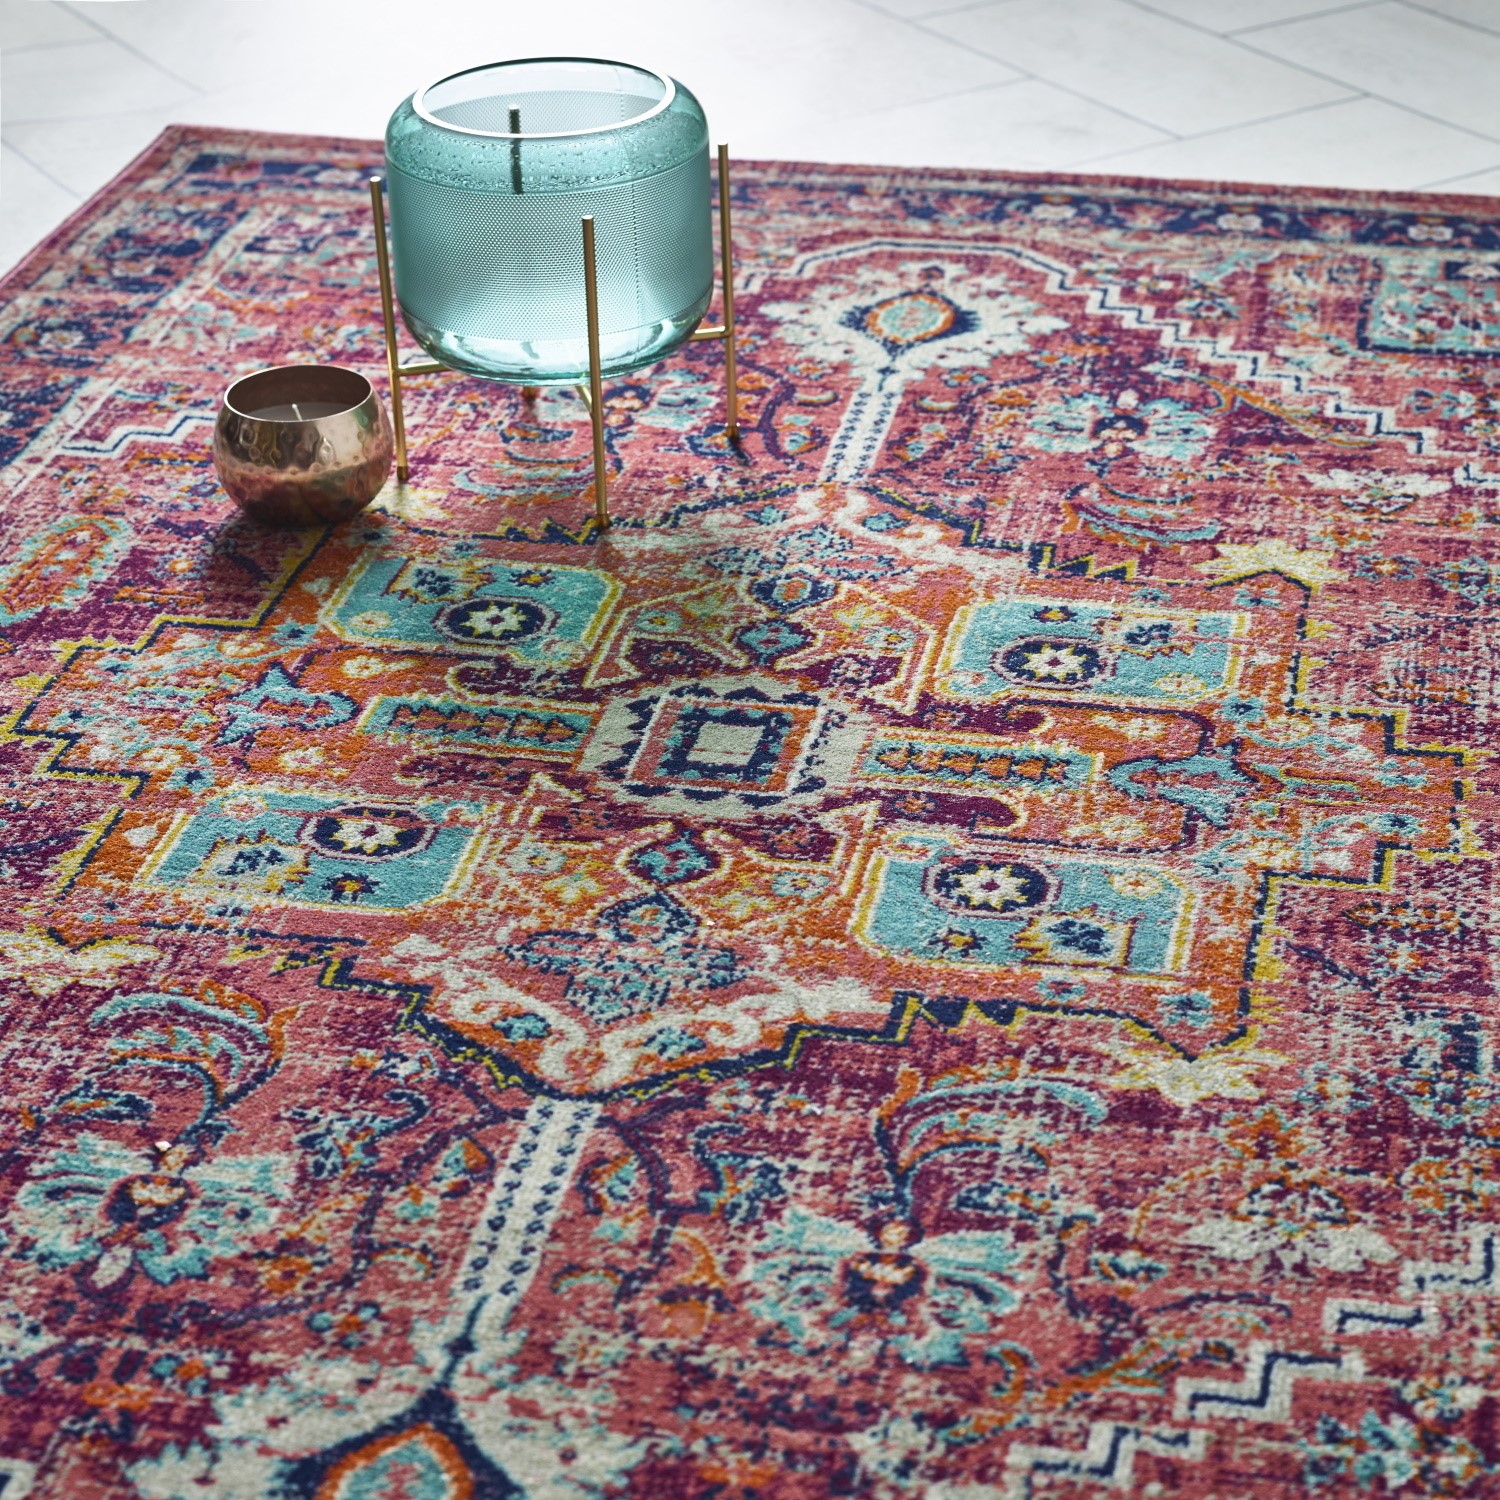 Read more about Ripley granada persian style rug in pink 170x120cm